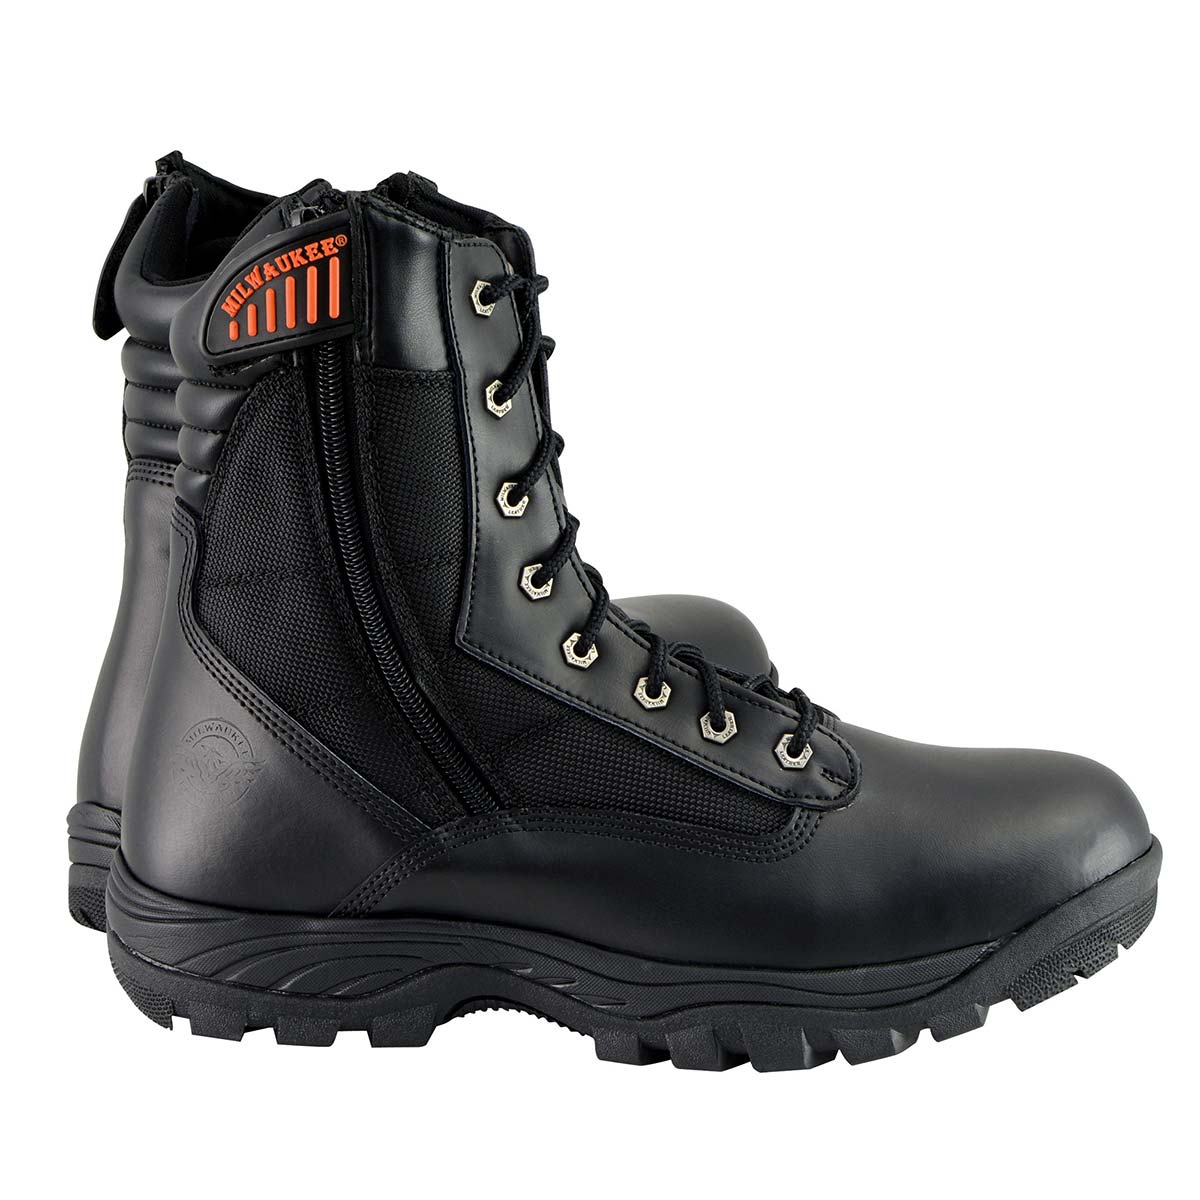 Men's 9in Black Leather Lace-Up Tactical Boots with Side Zippers